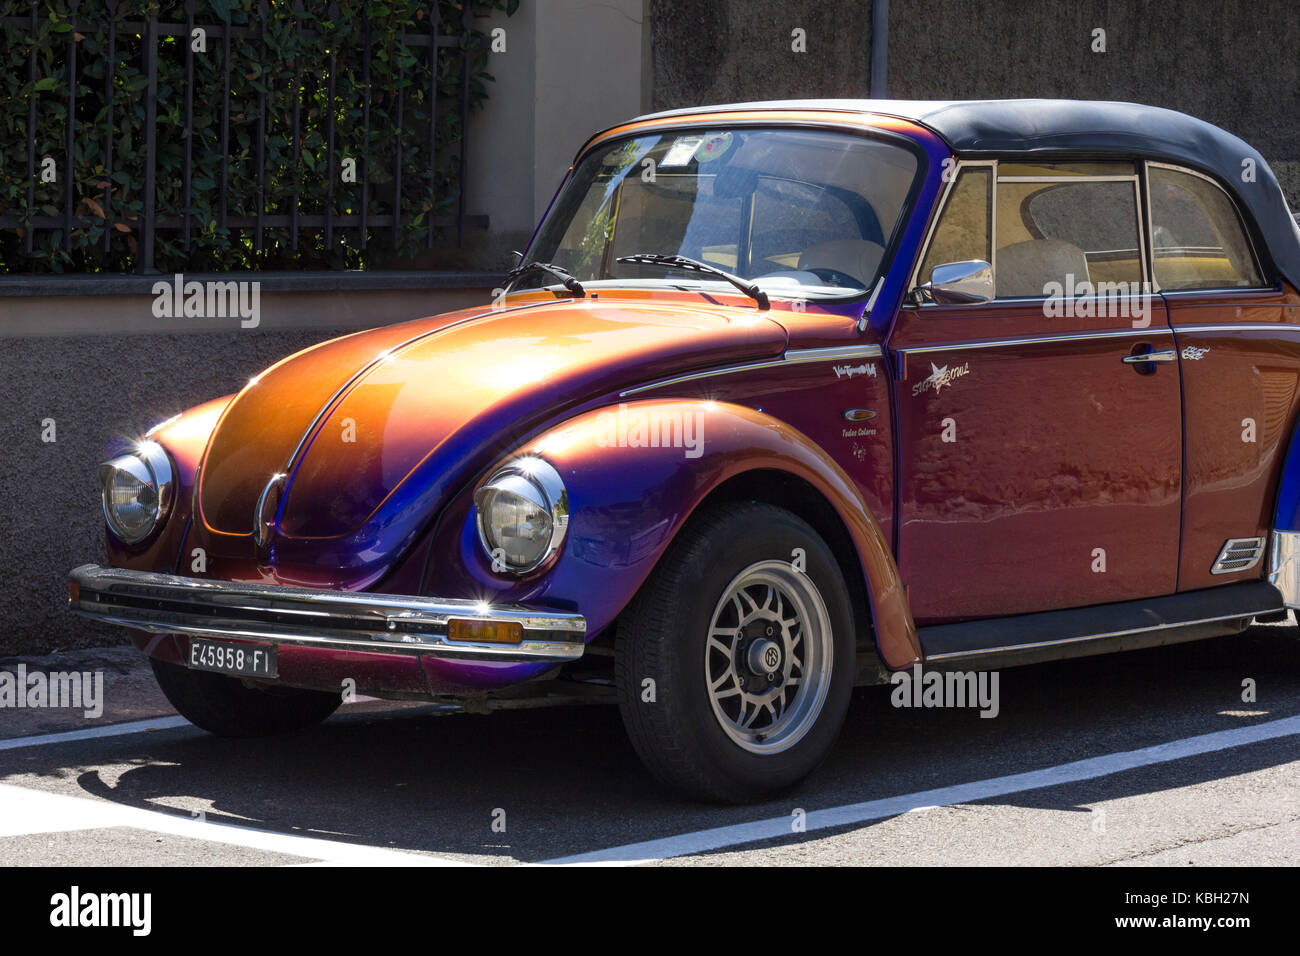 LASTRA A SIGNA, ITALY - AUGUST 30 2015: Vintage metalized cabriolet Beetle in Tuscany, Italy Stock Photo